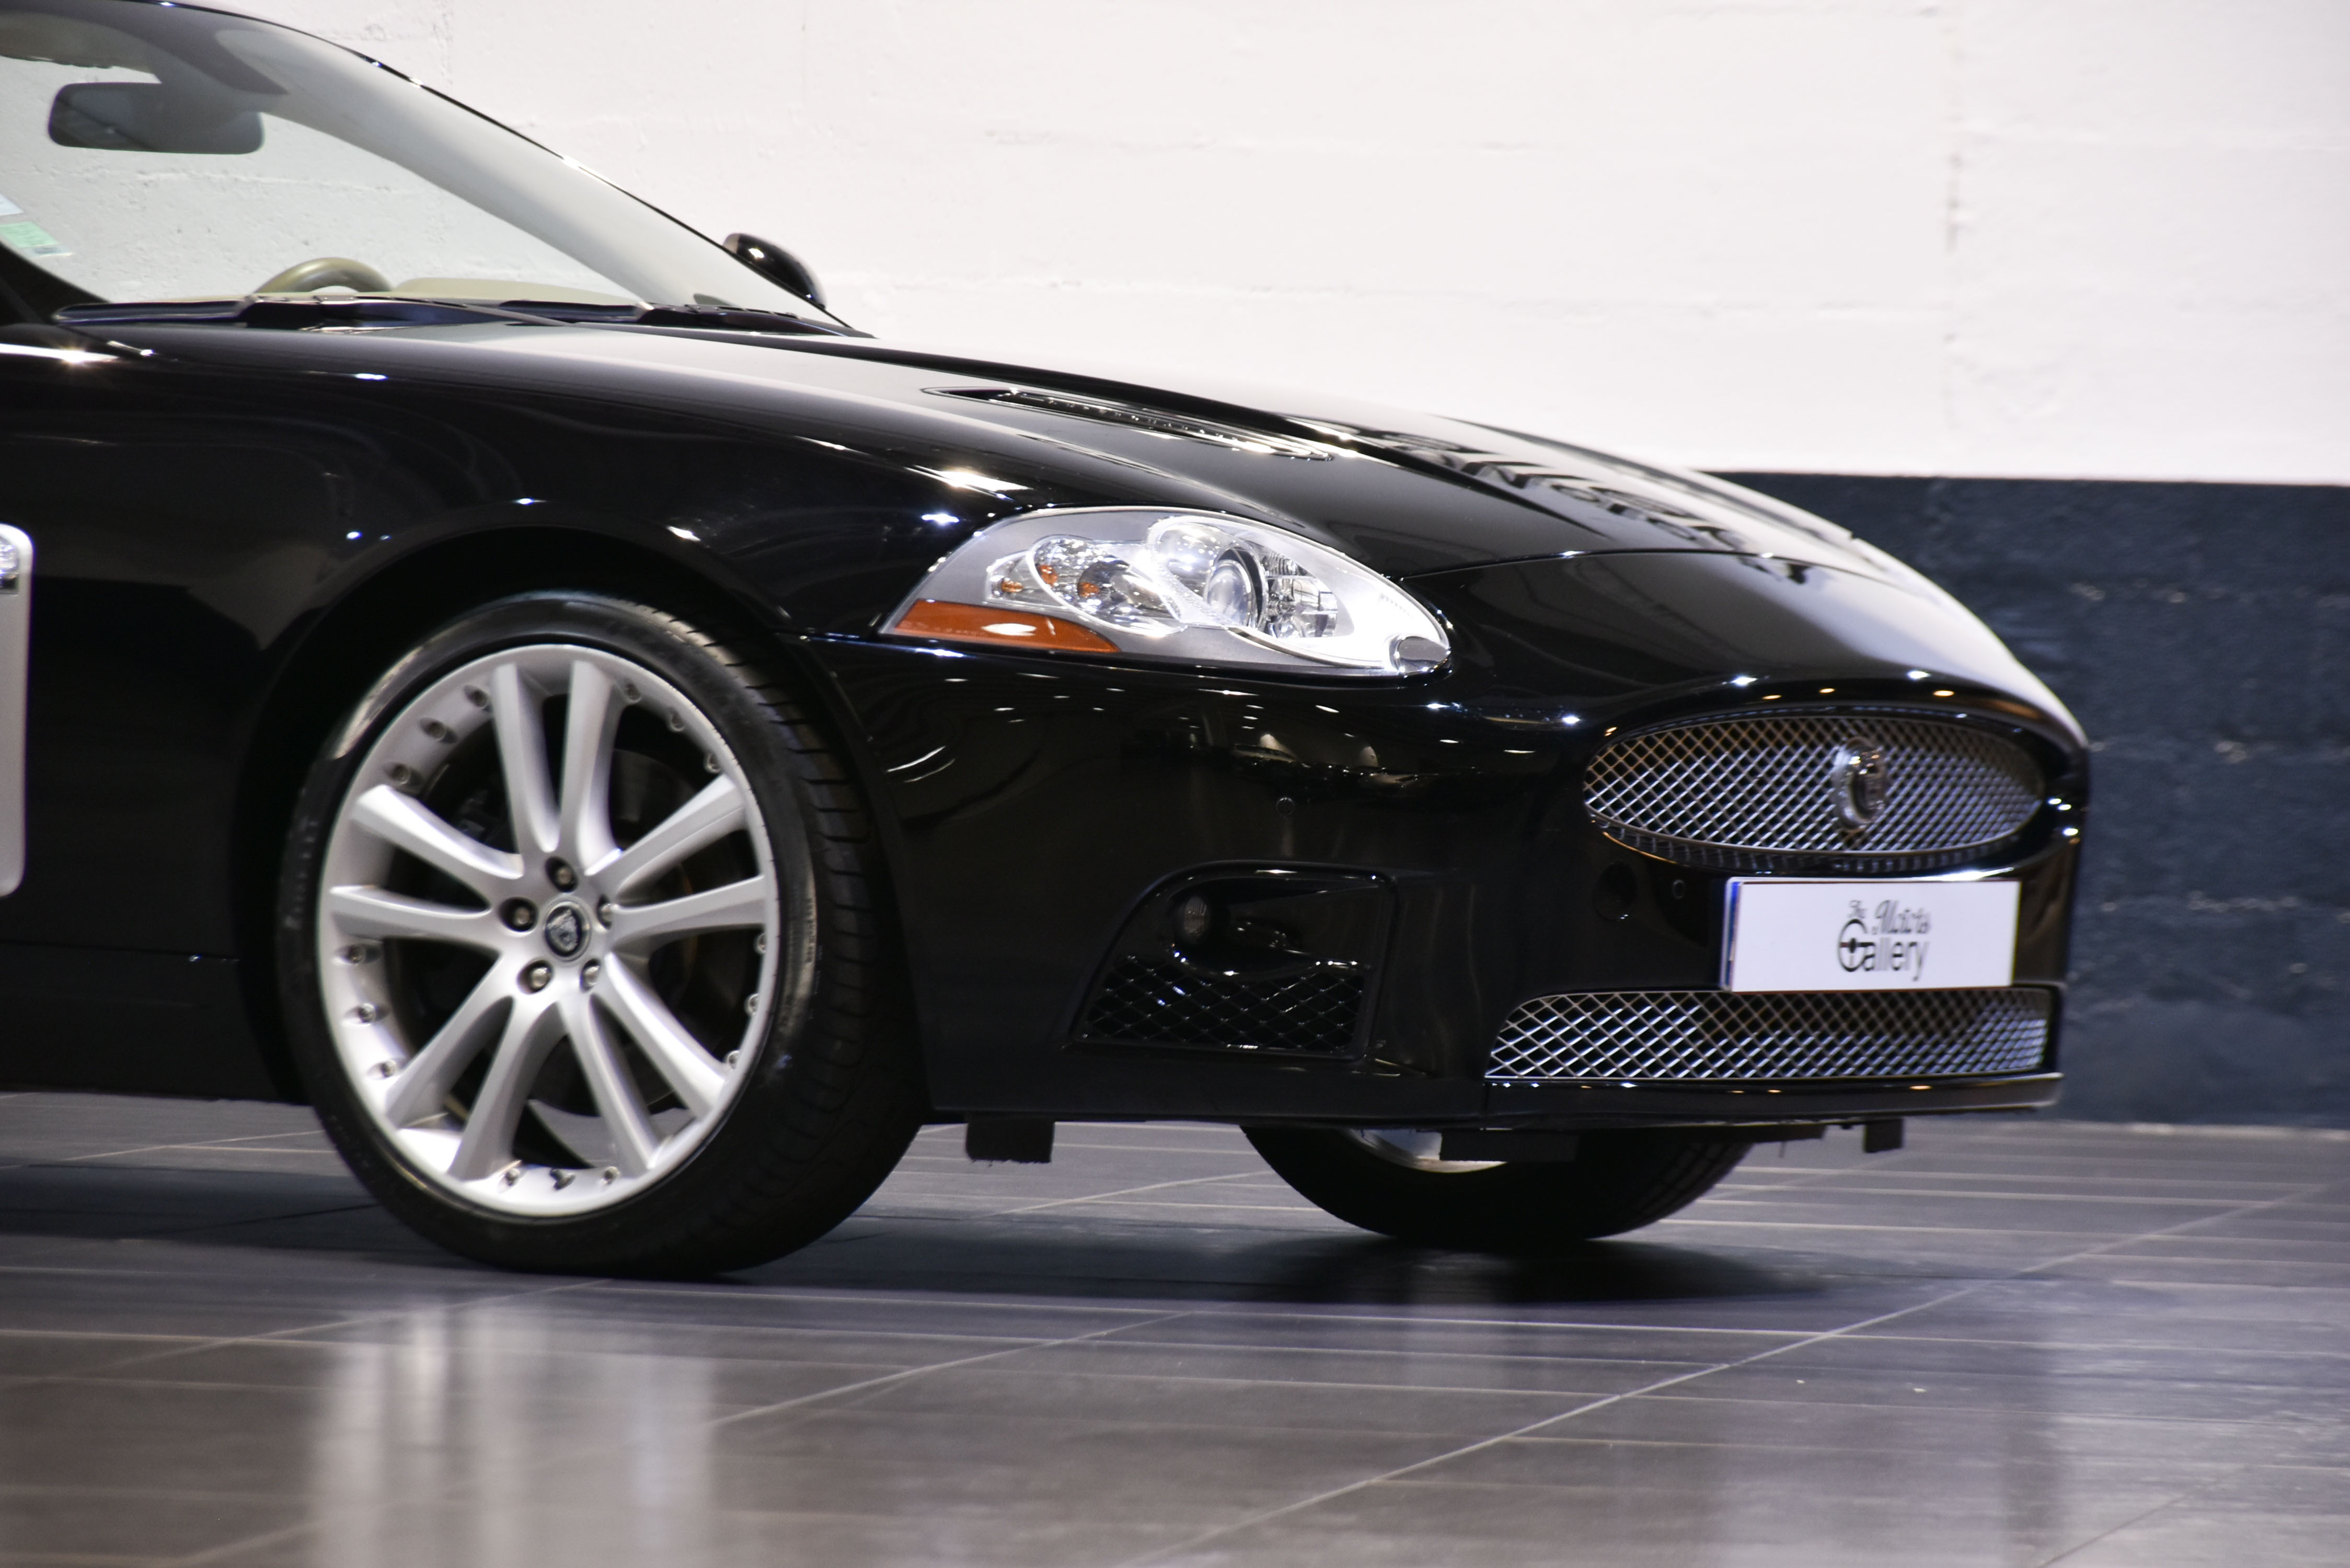 XKR Cabriolet